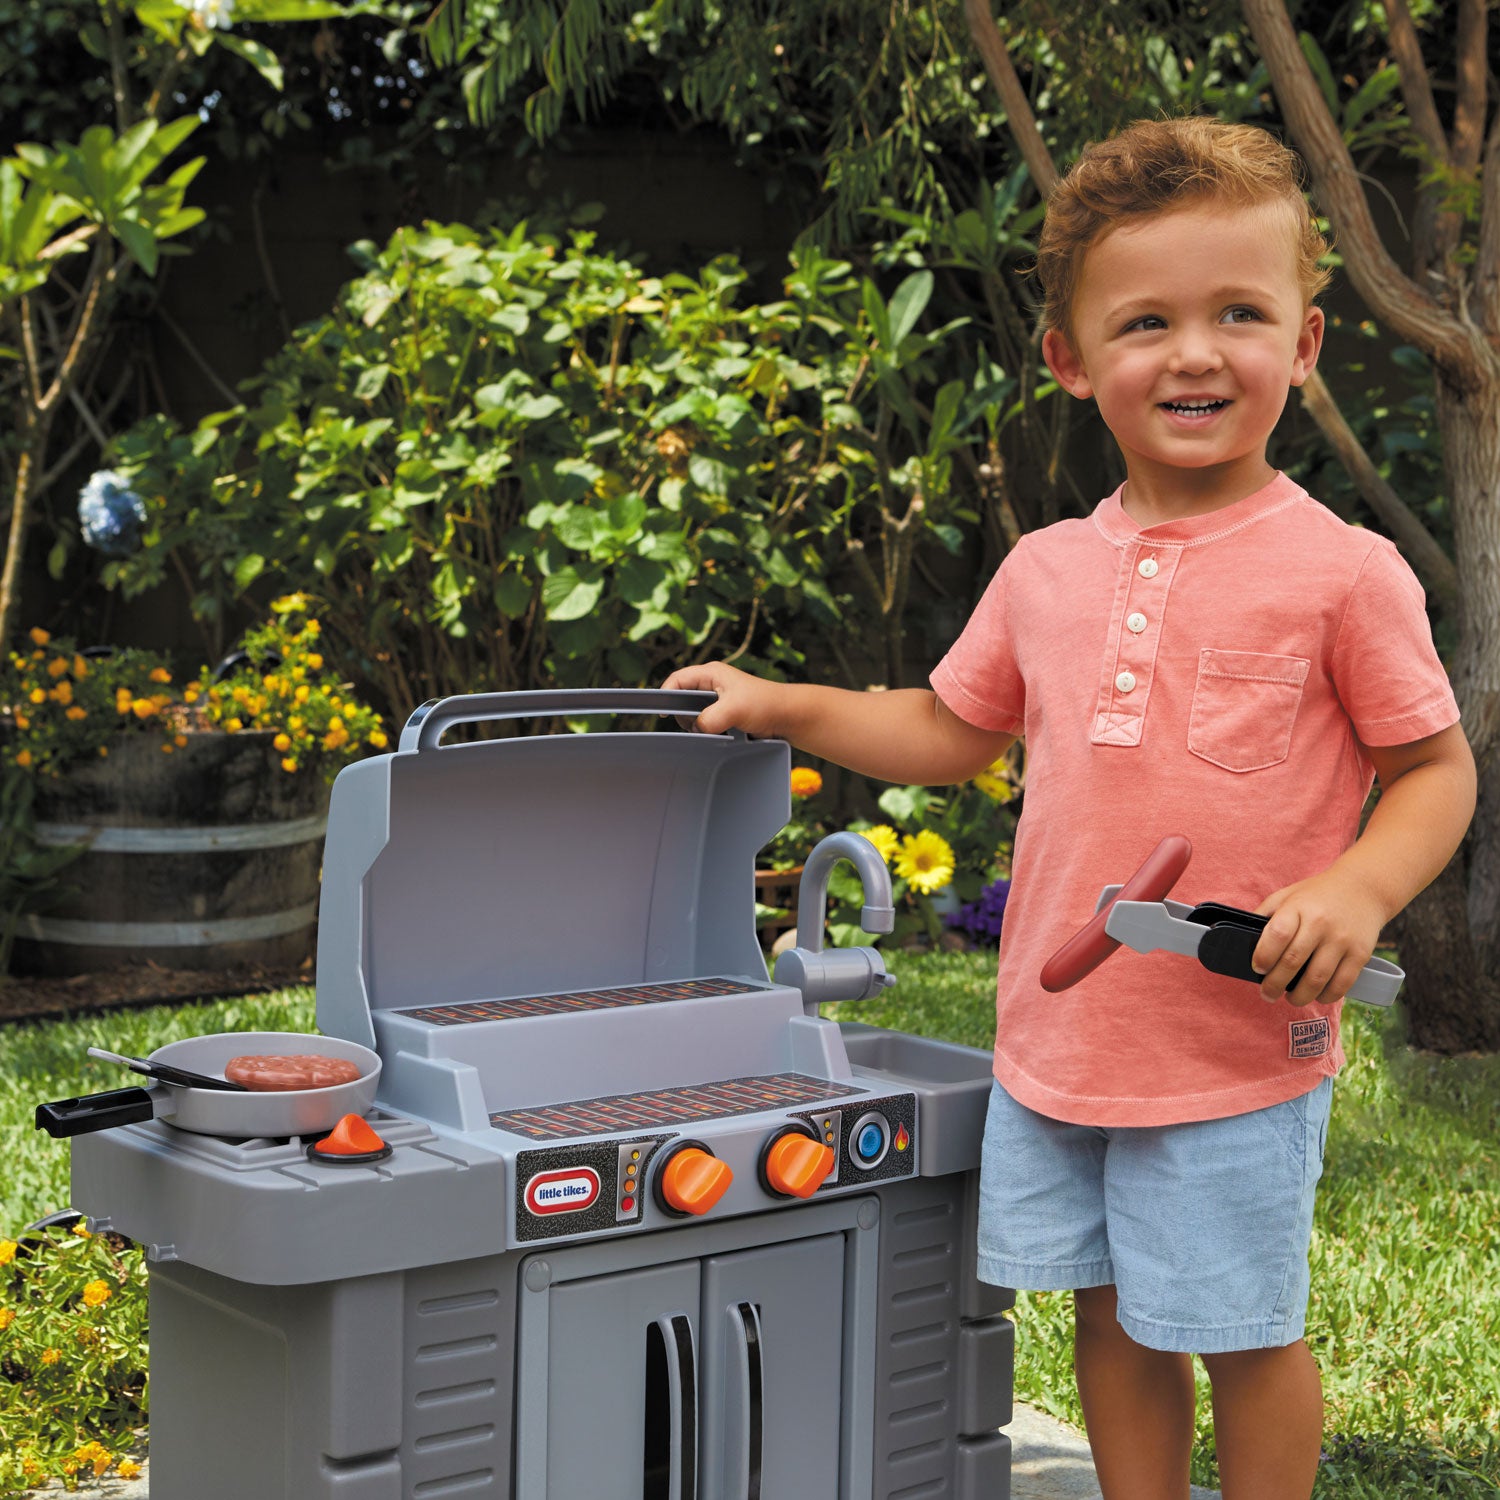 Best Buy: Little Tikes Cook 'n Grow BBQ Grill Play Set 633904M